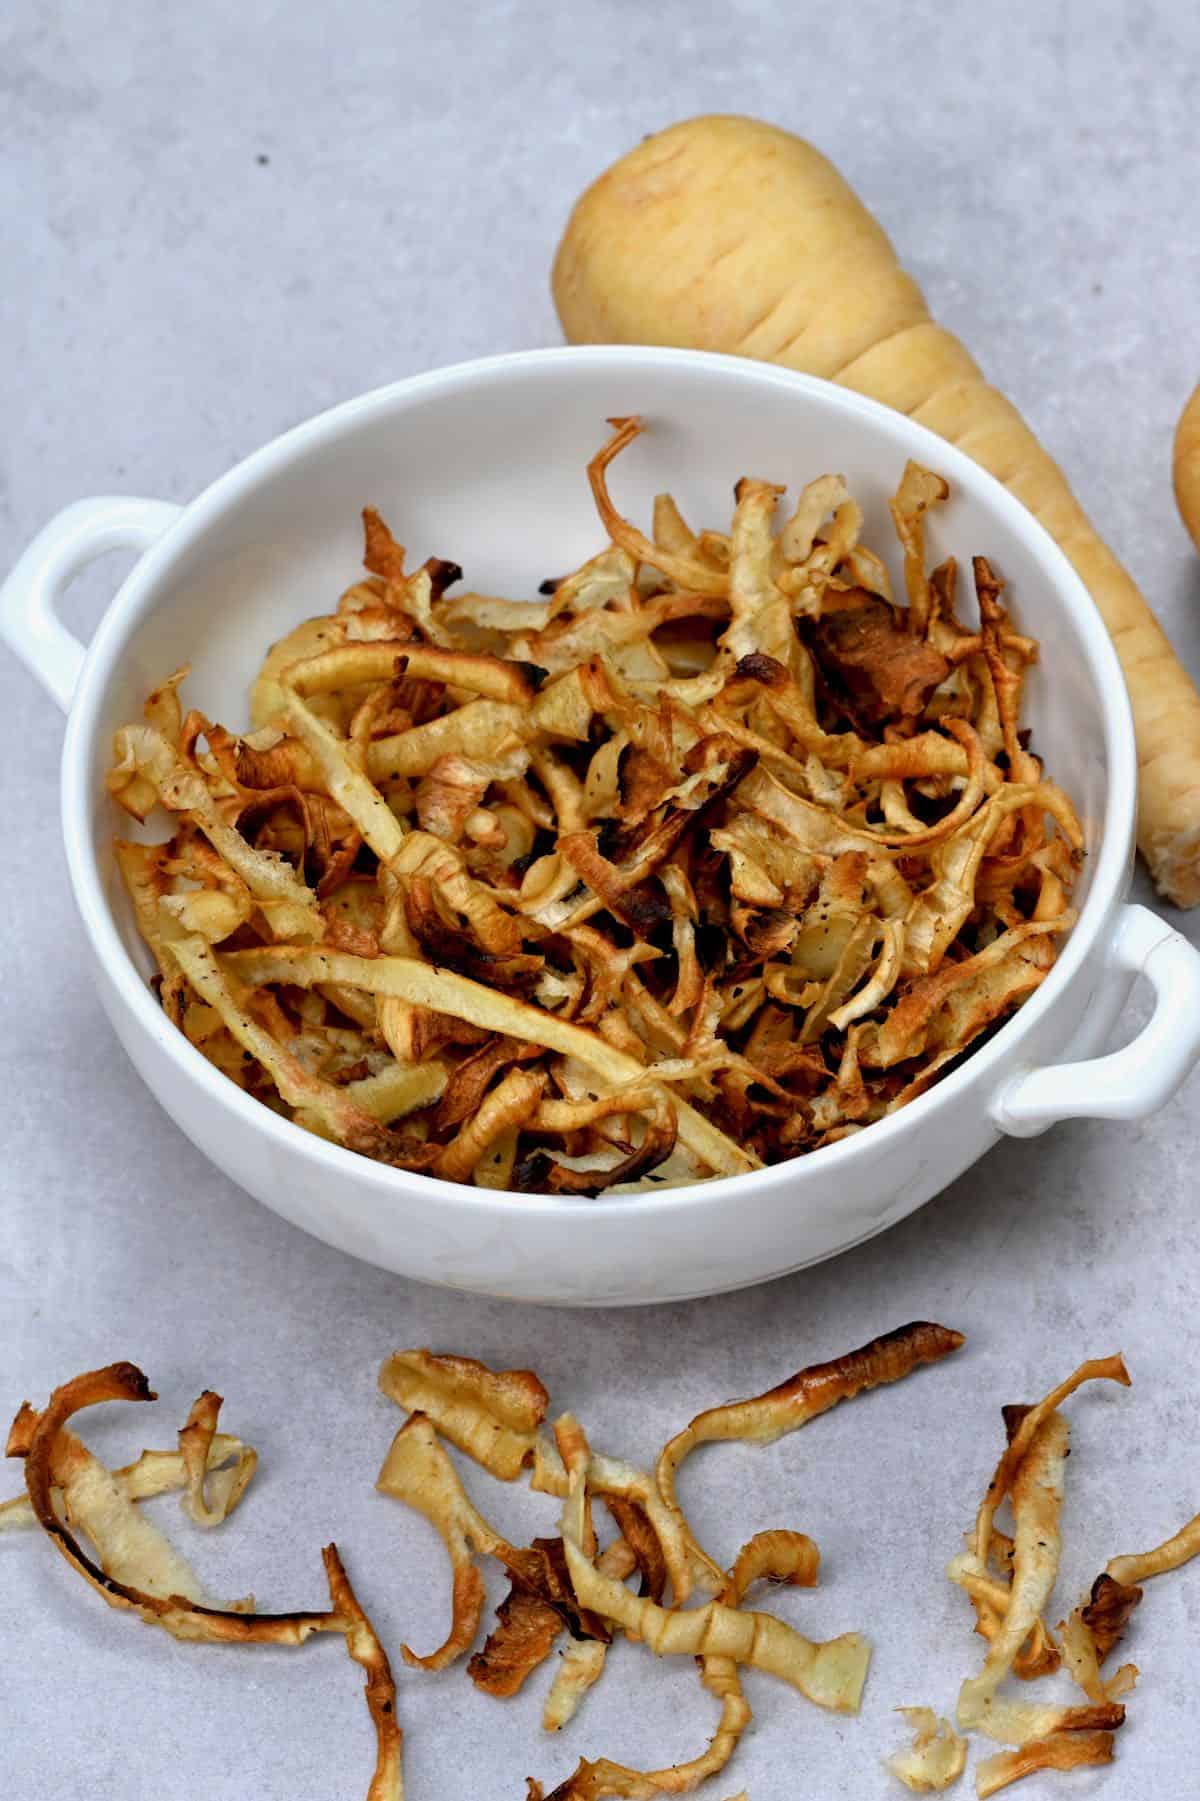 Parsnip peel chips in a white bowl